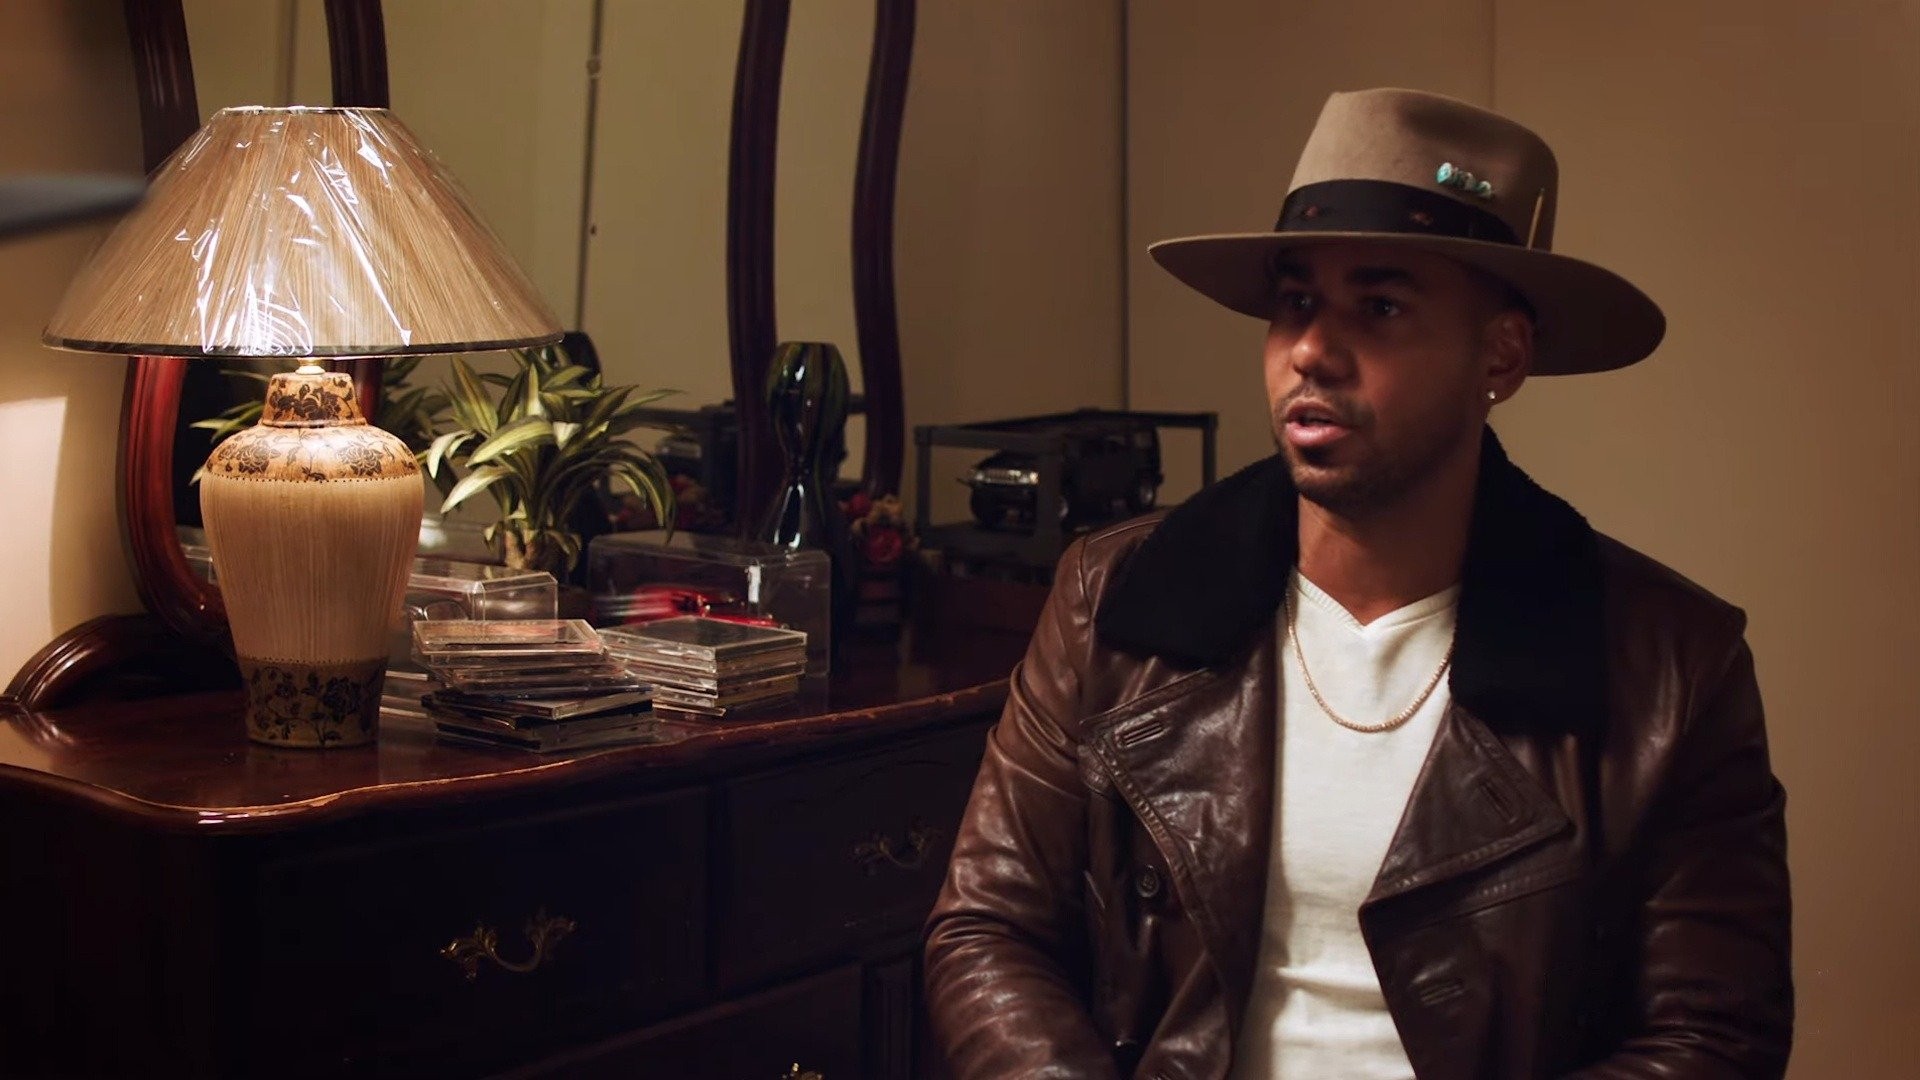 The King of Bachata” Romeo Santos Confirms Details for Leg 2 of His Highly  Successful Golden Tour